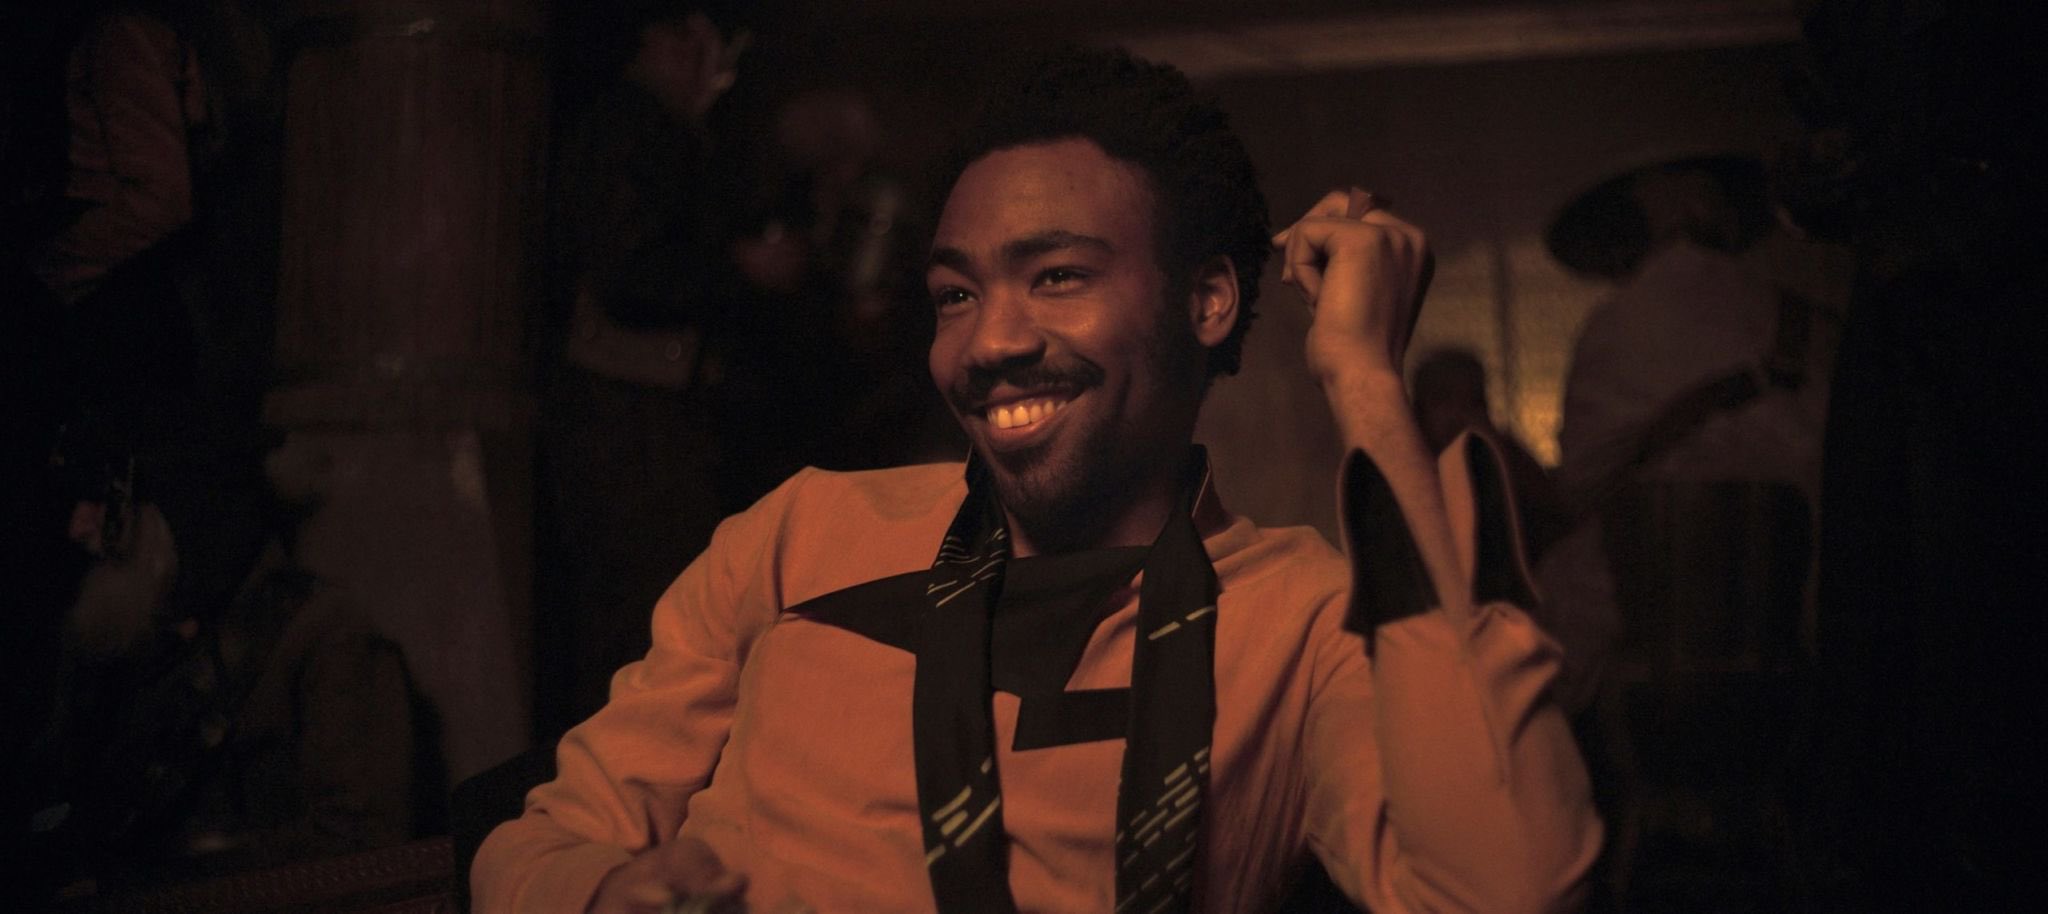 Happy birthday to the one and only Donald Glover 